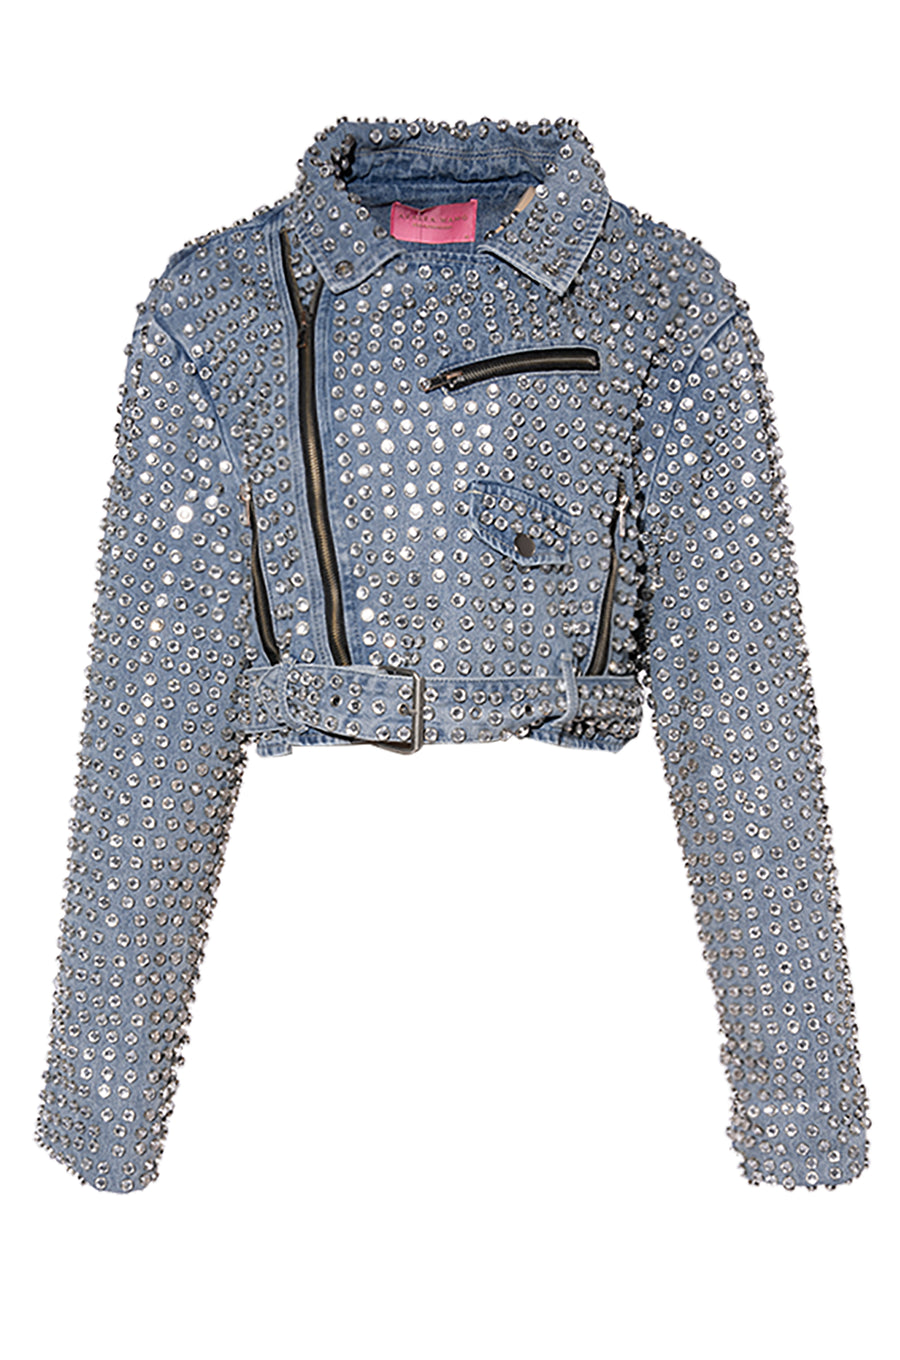 denim motorcycle jacket with silver stud detail all over.